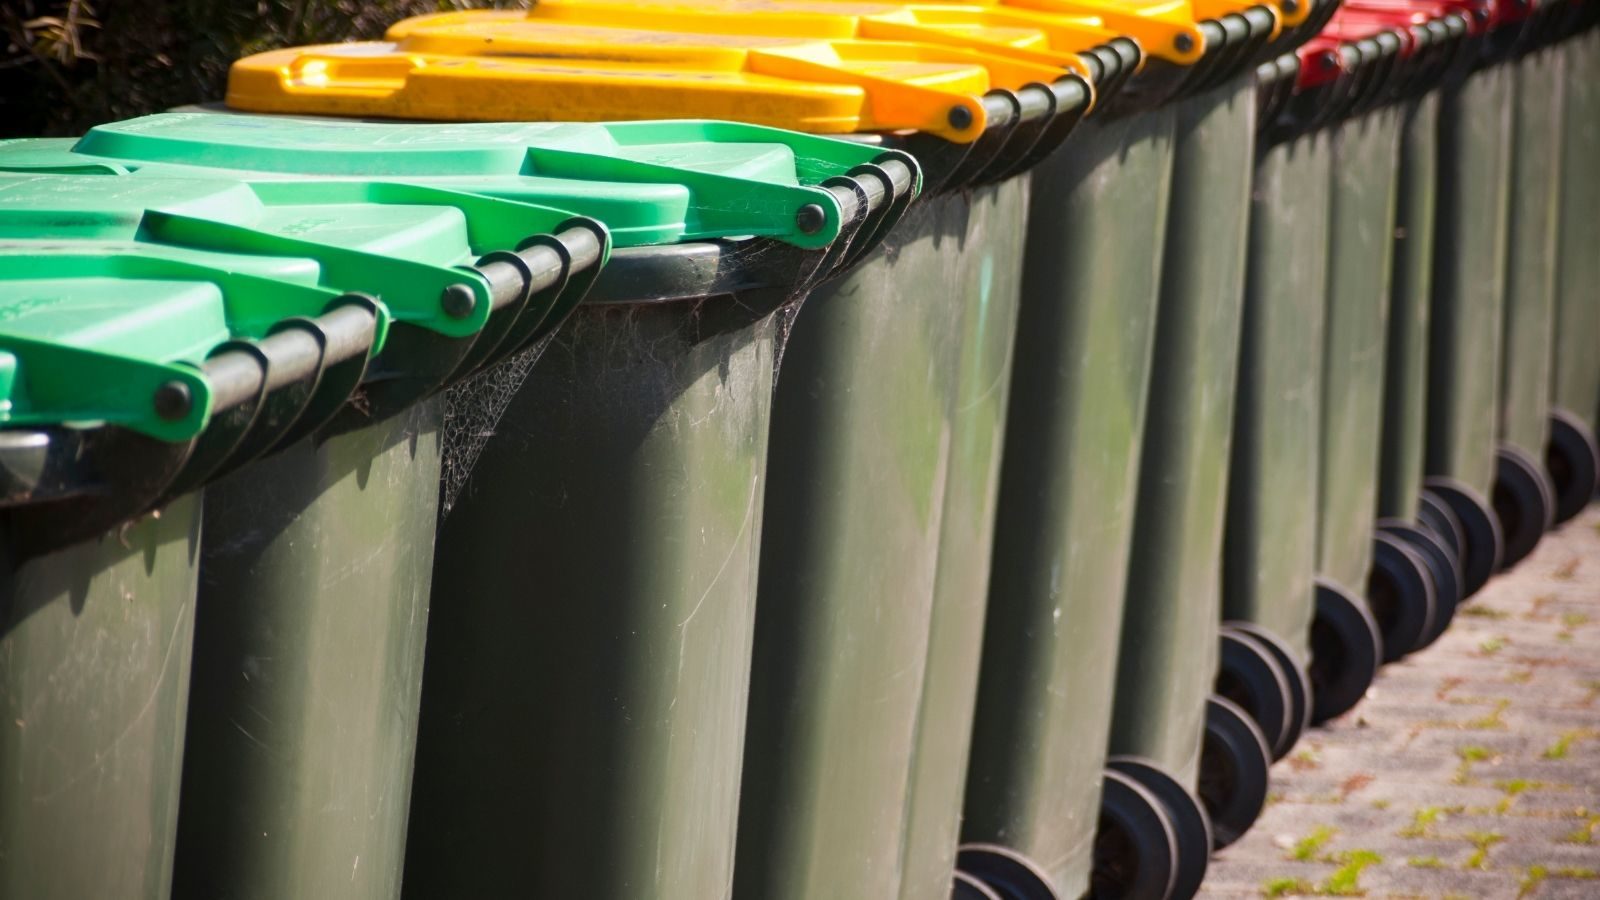 Household rubbish and recycling bins lined up in a row